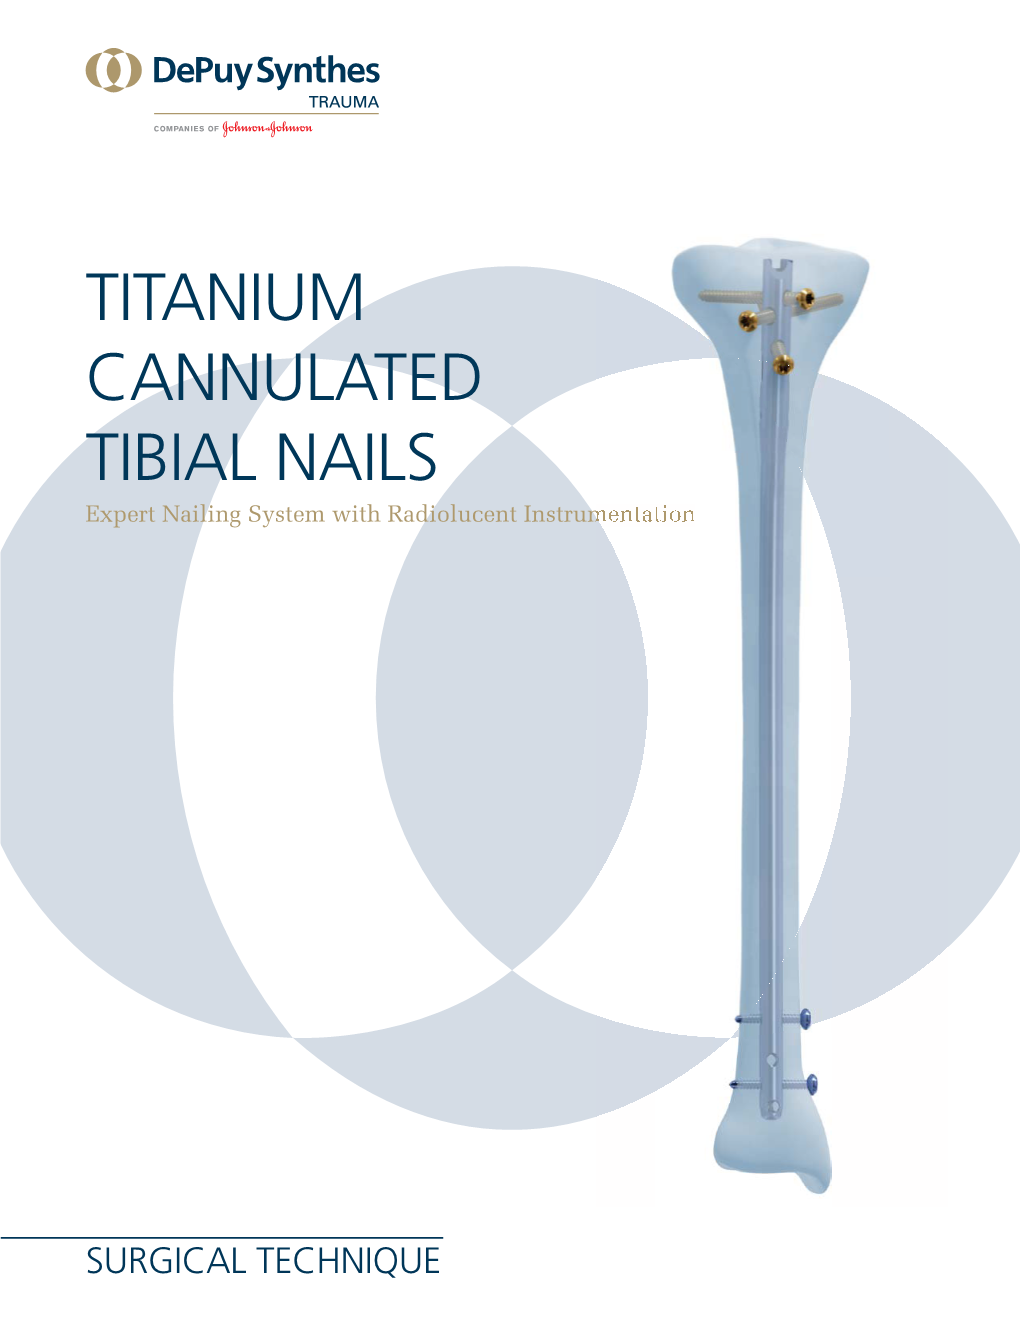 TITANIUM CANNULATED TIBIAL NAILS Expert Nailing System with Radiolucent Instrumentation